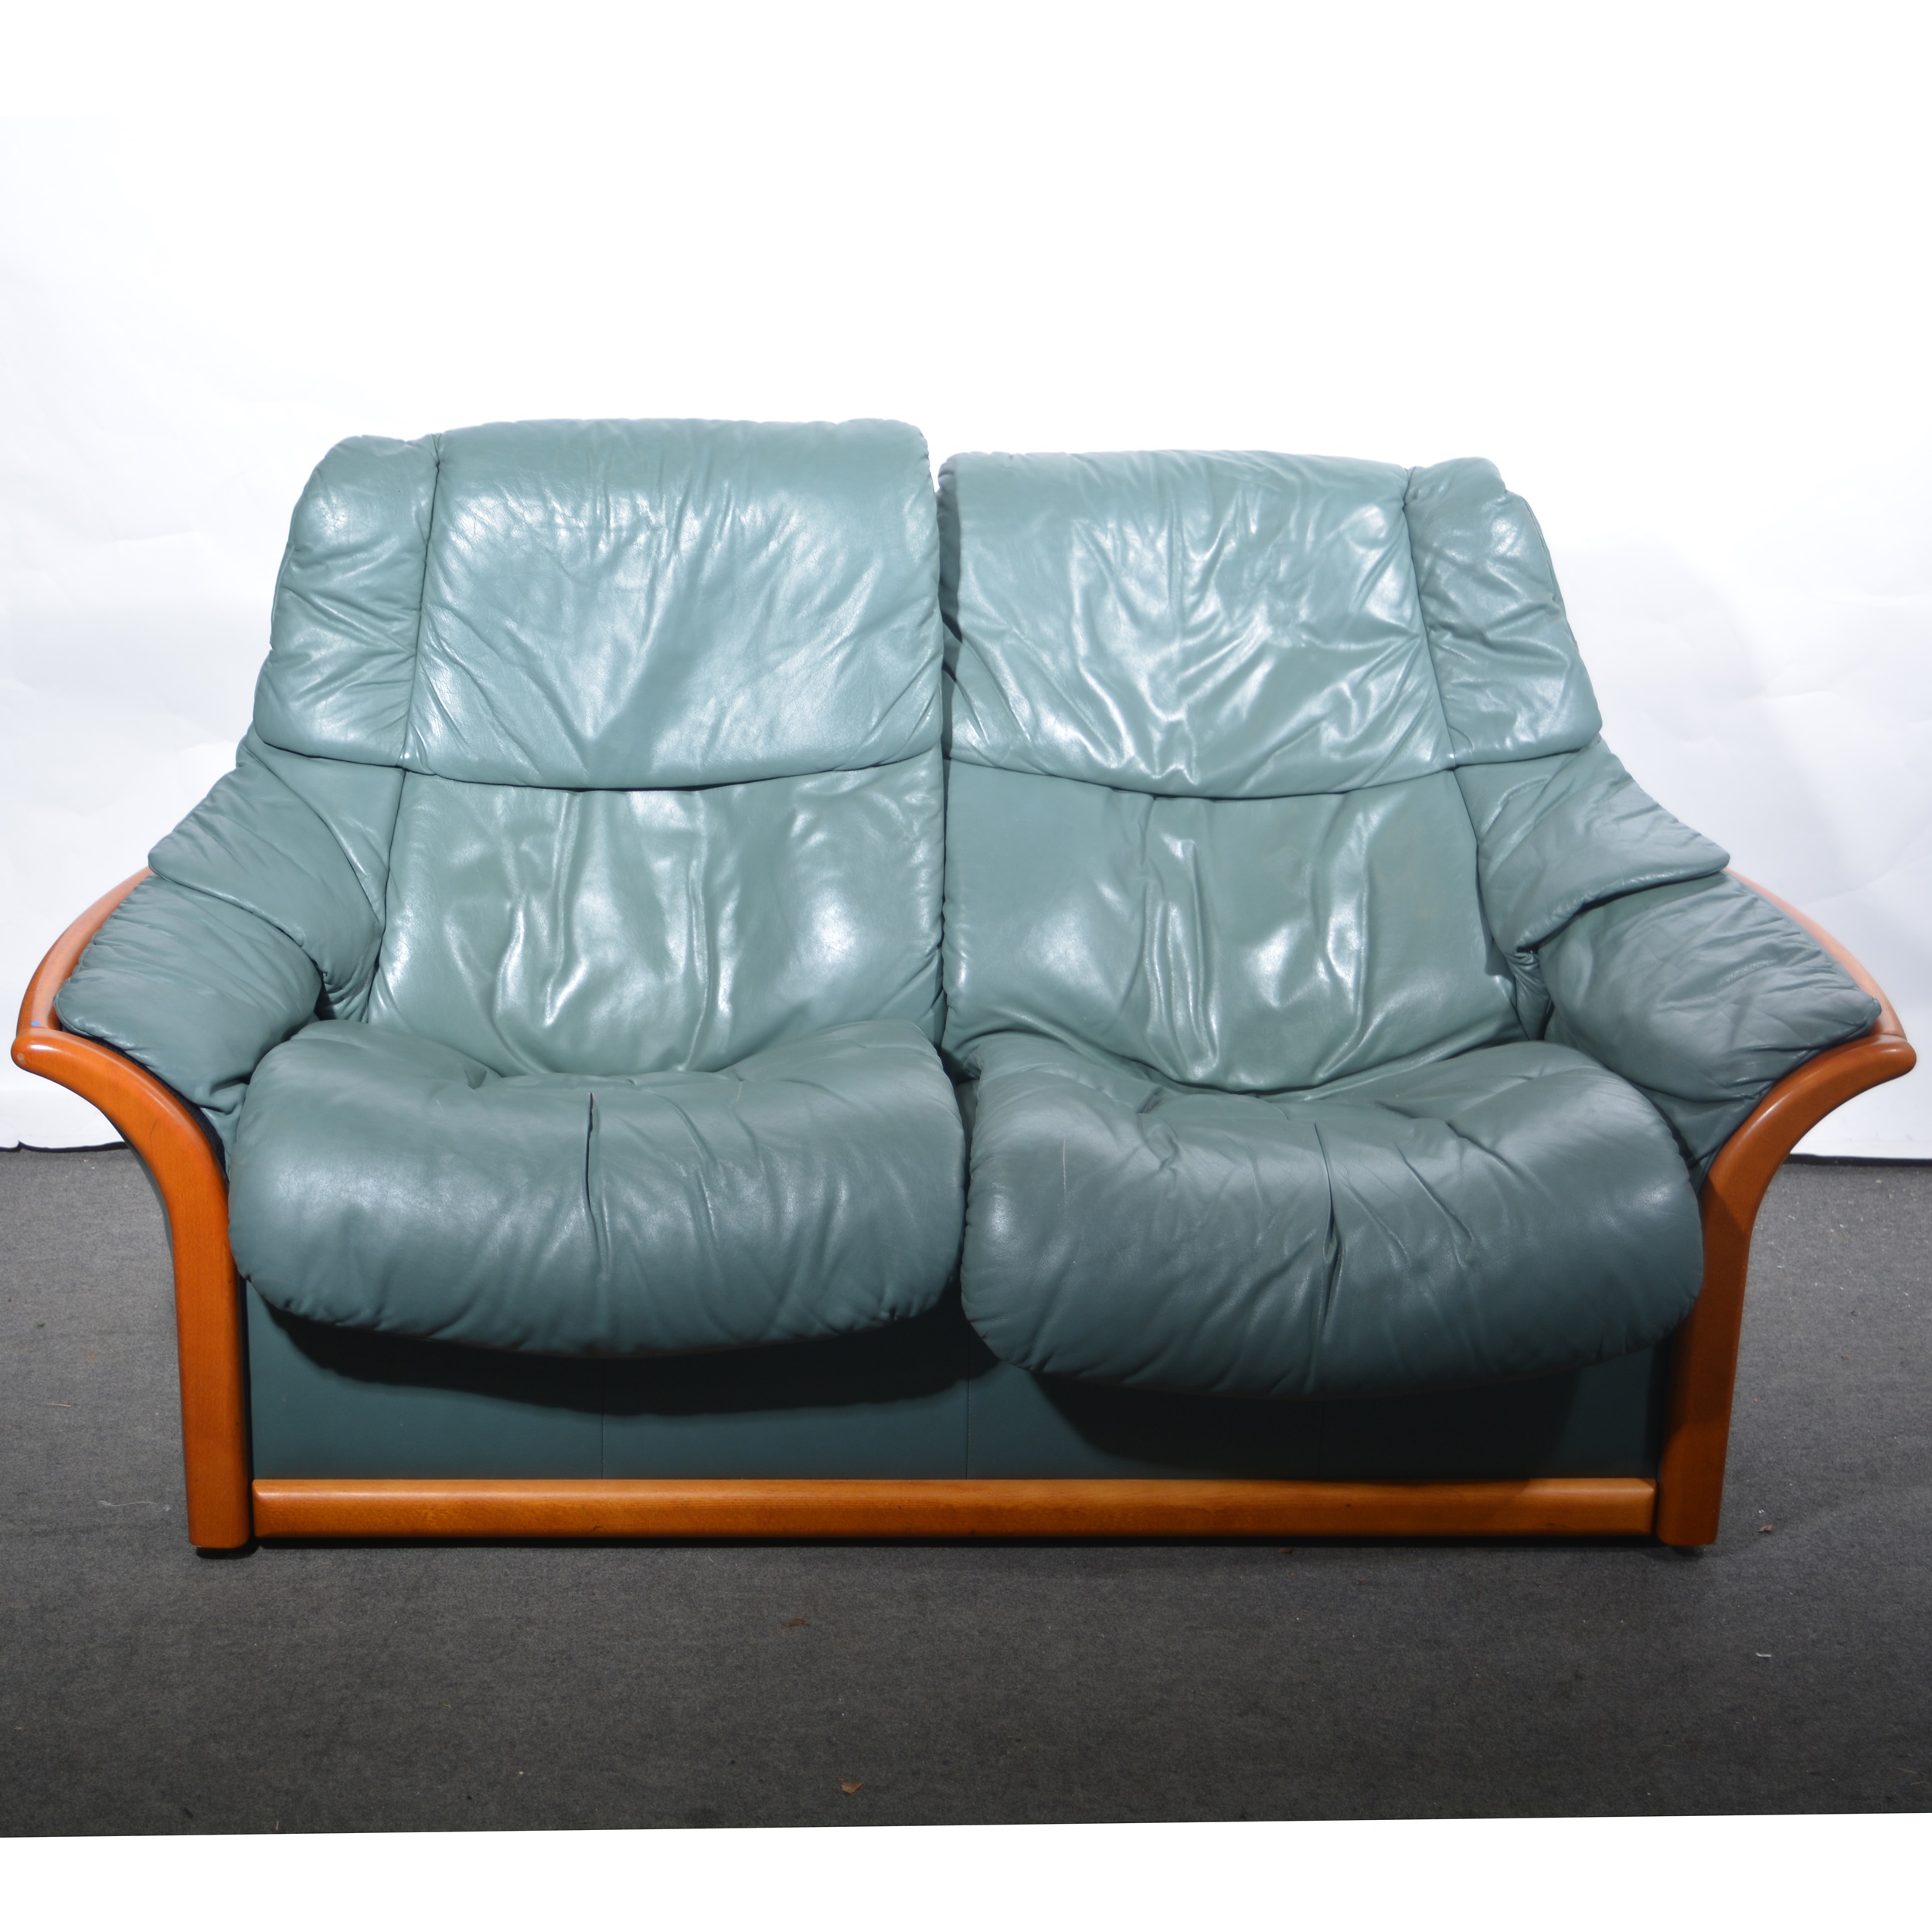 A pair of 'Stressless' leather adjustable easy chairs, with stools, and a two-seat sofa. - Image 2 of 2